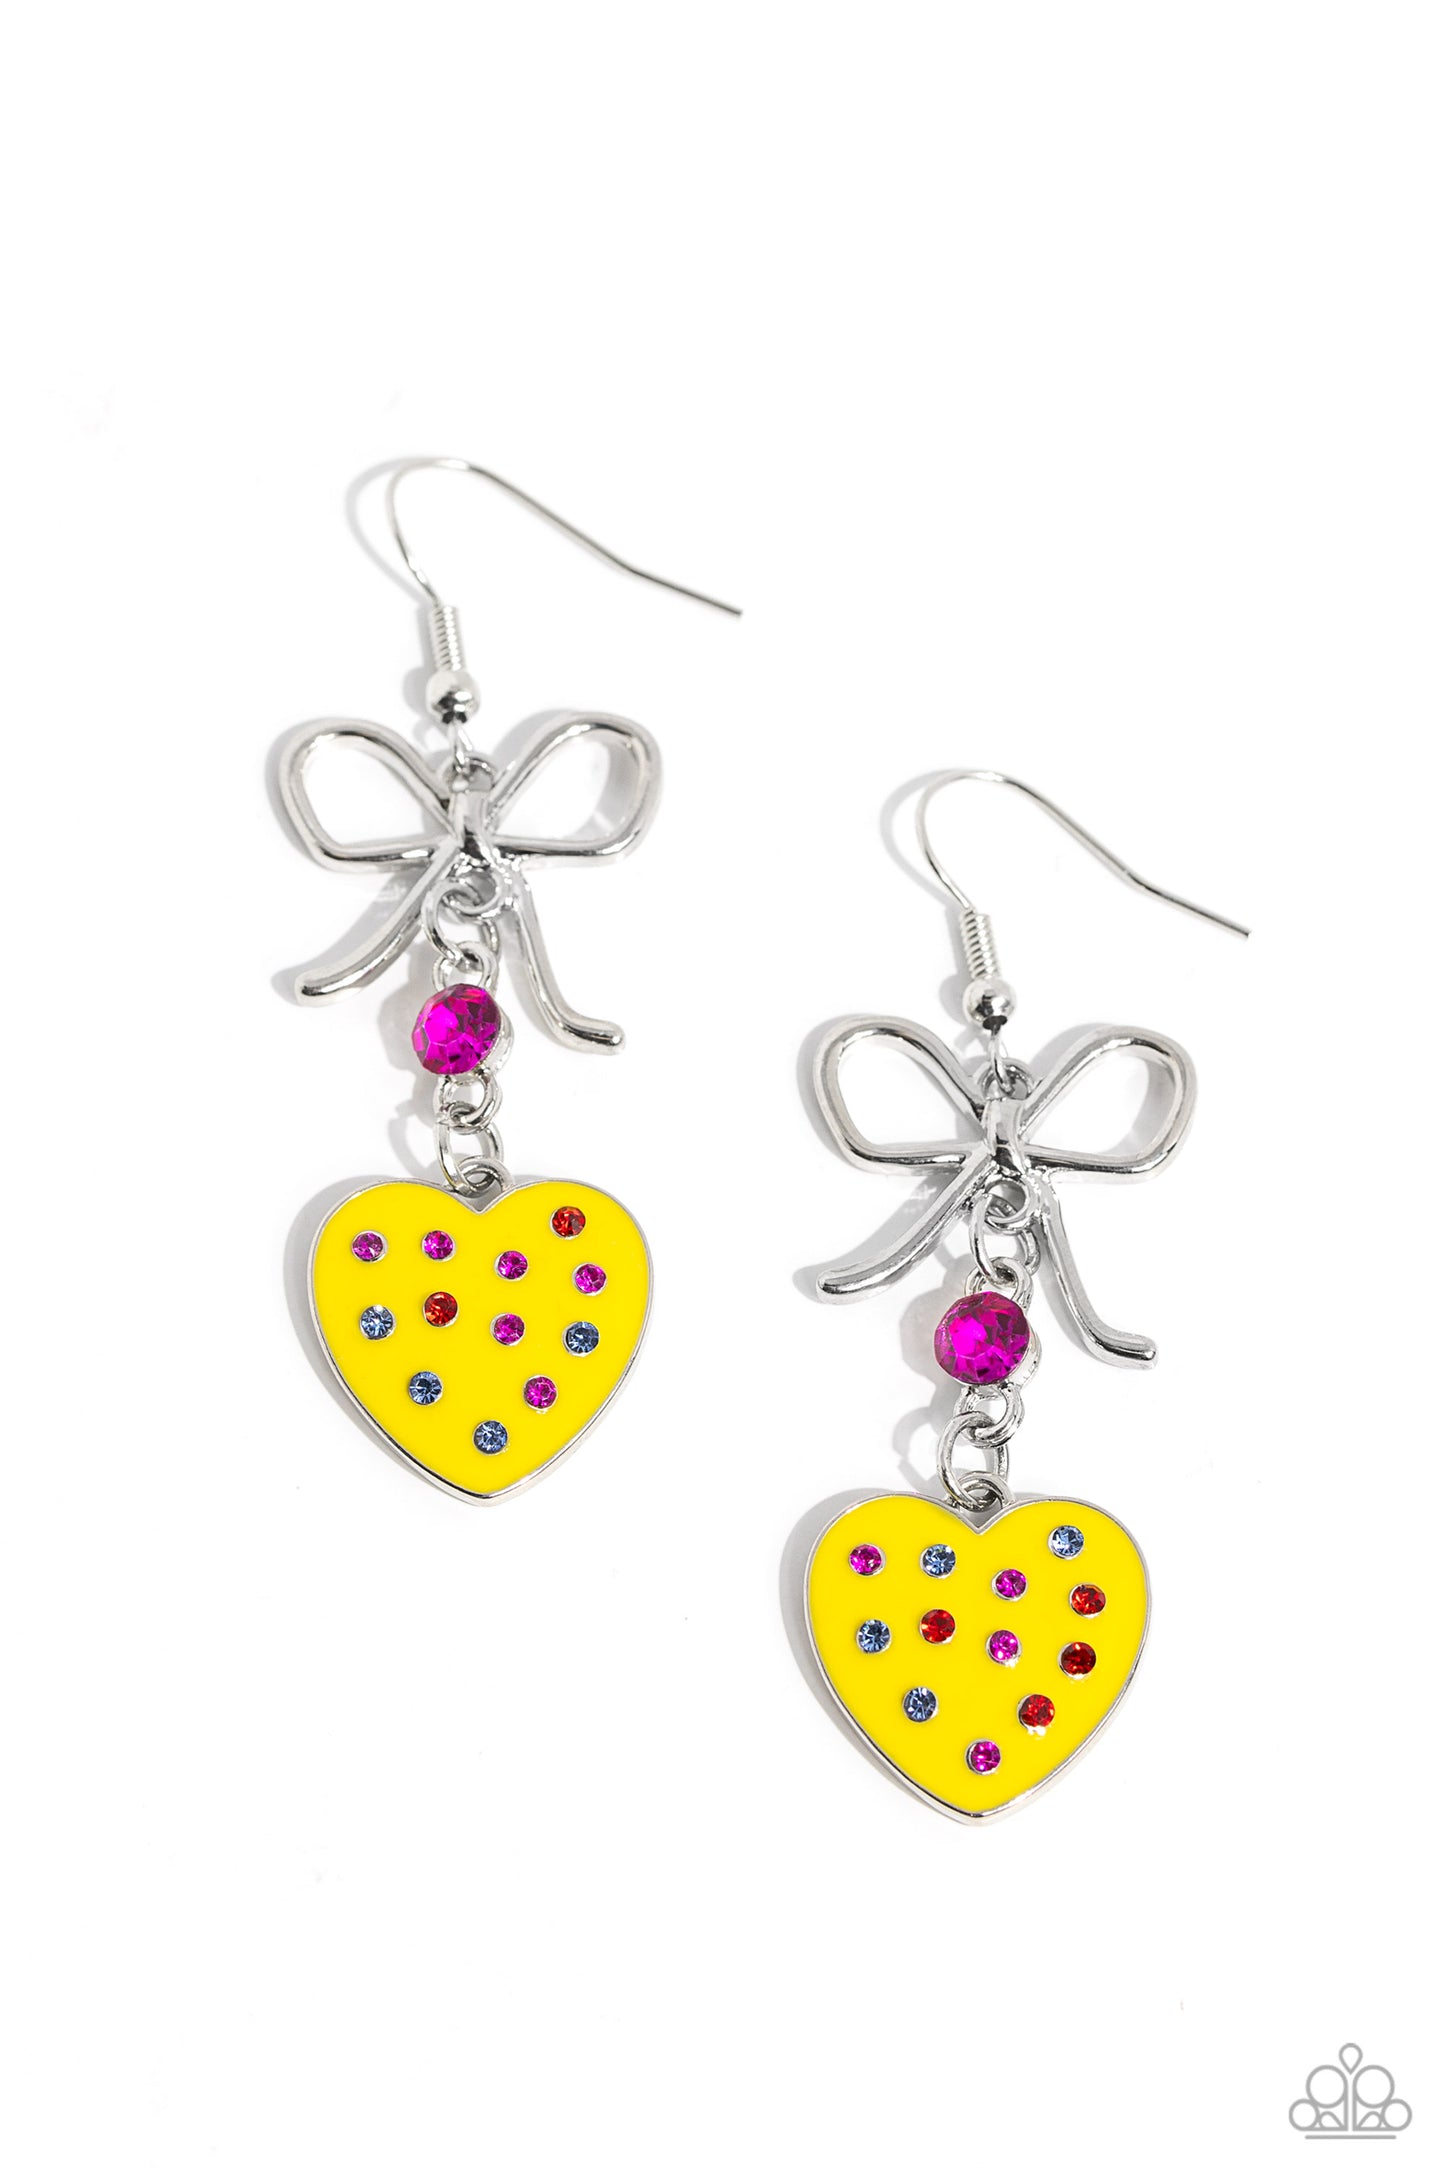 BOW Away Zone Yellow Earring - Paparazzi Accessories  Featuring airy loops, a dainty silver bow gives way to a High Visibility-painted heart frame adorned in dainty red, blue, and pink rhinestones for a flirtatious fashion. A bigger pink rhinestone separates the silver bow and High Visibility heart for an additional pop of feminine color. Earring attaches to a standard fishhook fitting.  Sold as one pair of earrings.  P5WH-YWXX-188XX